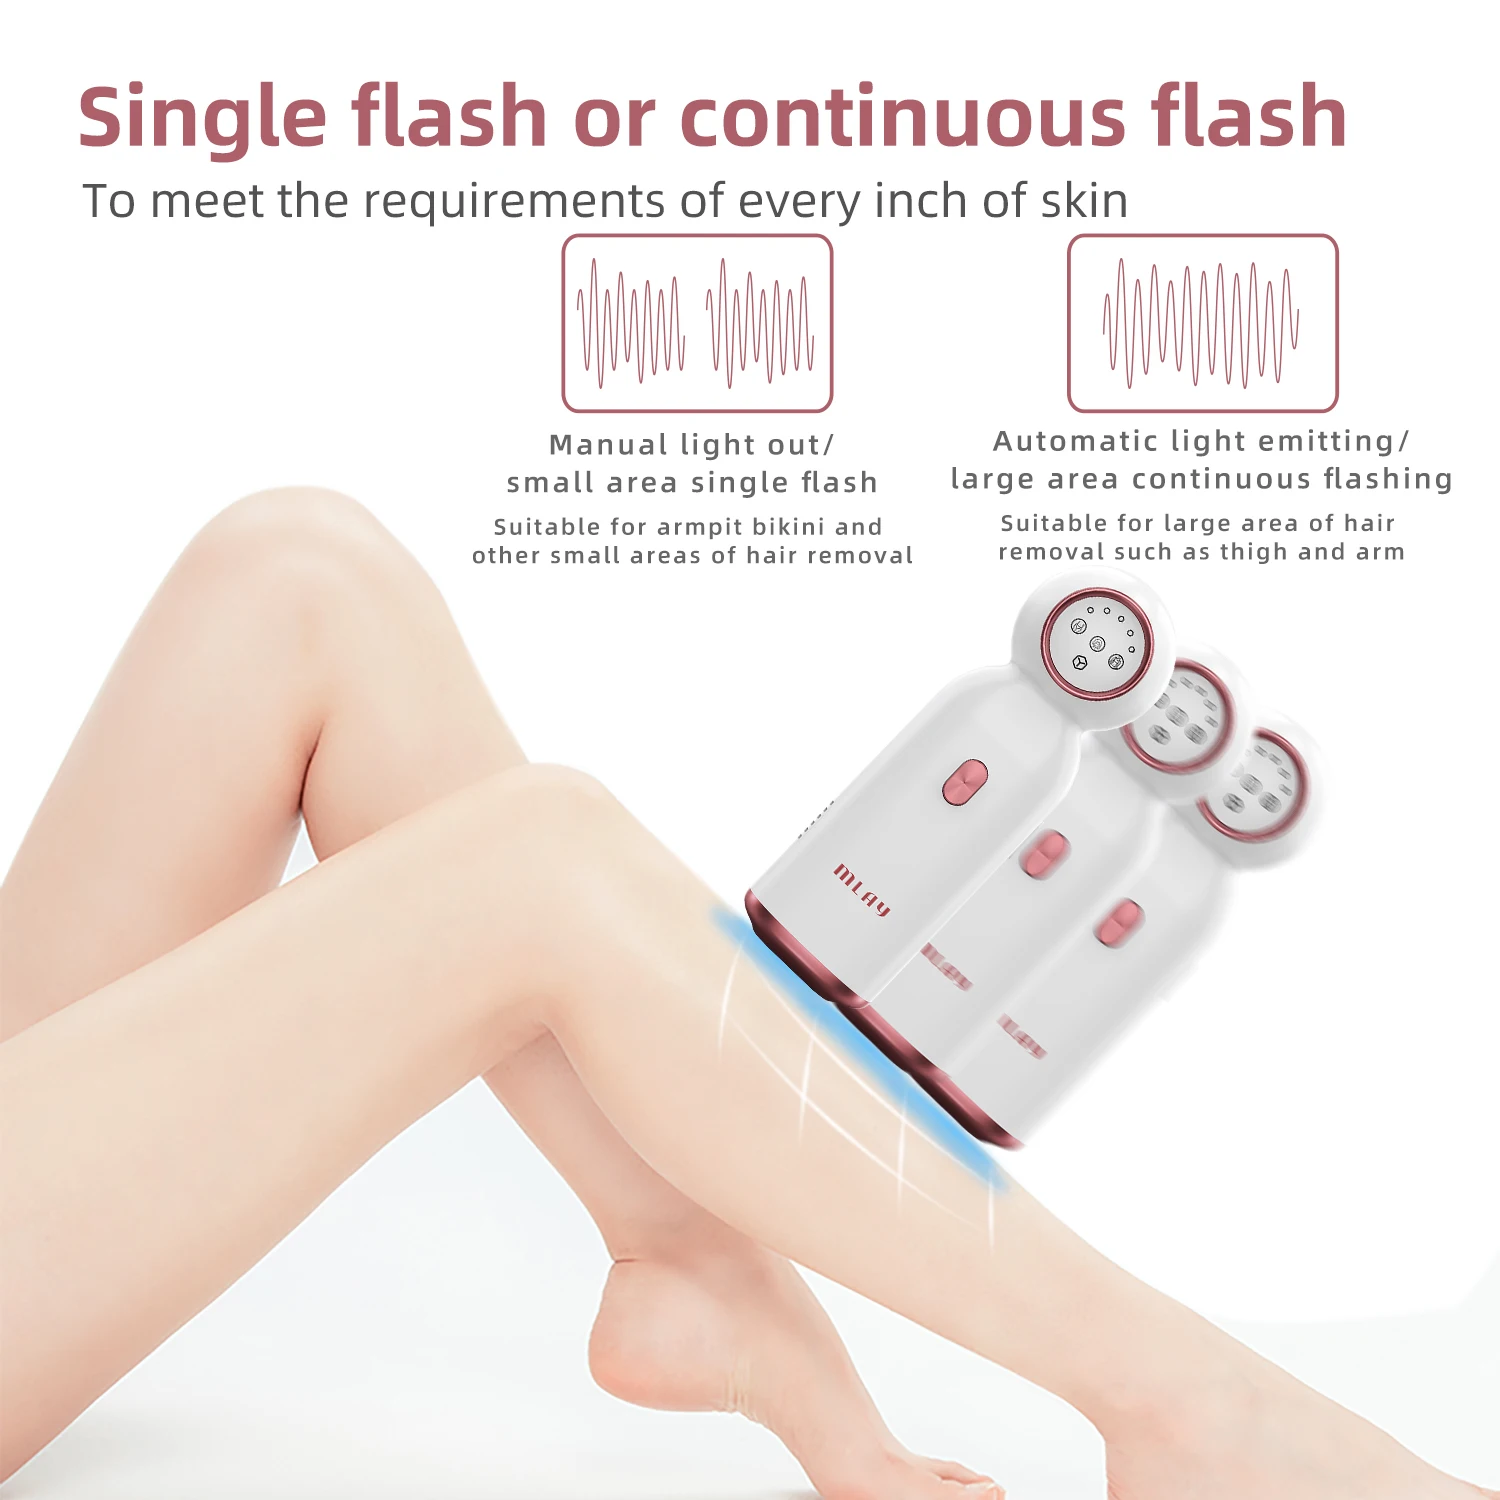 Mlay T10 Home Use IPL Hair Removal Device Special Design Cooling System Painless and Permanent for Body Hair Removal